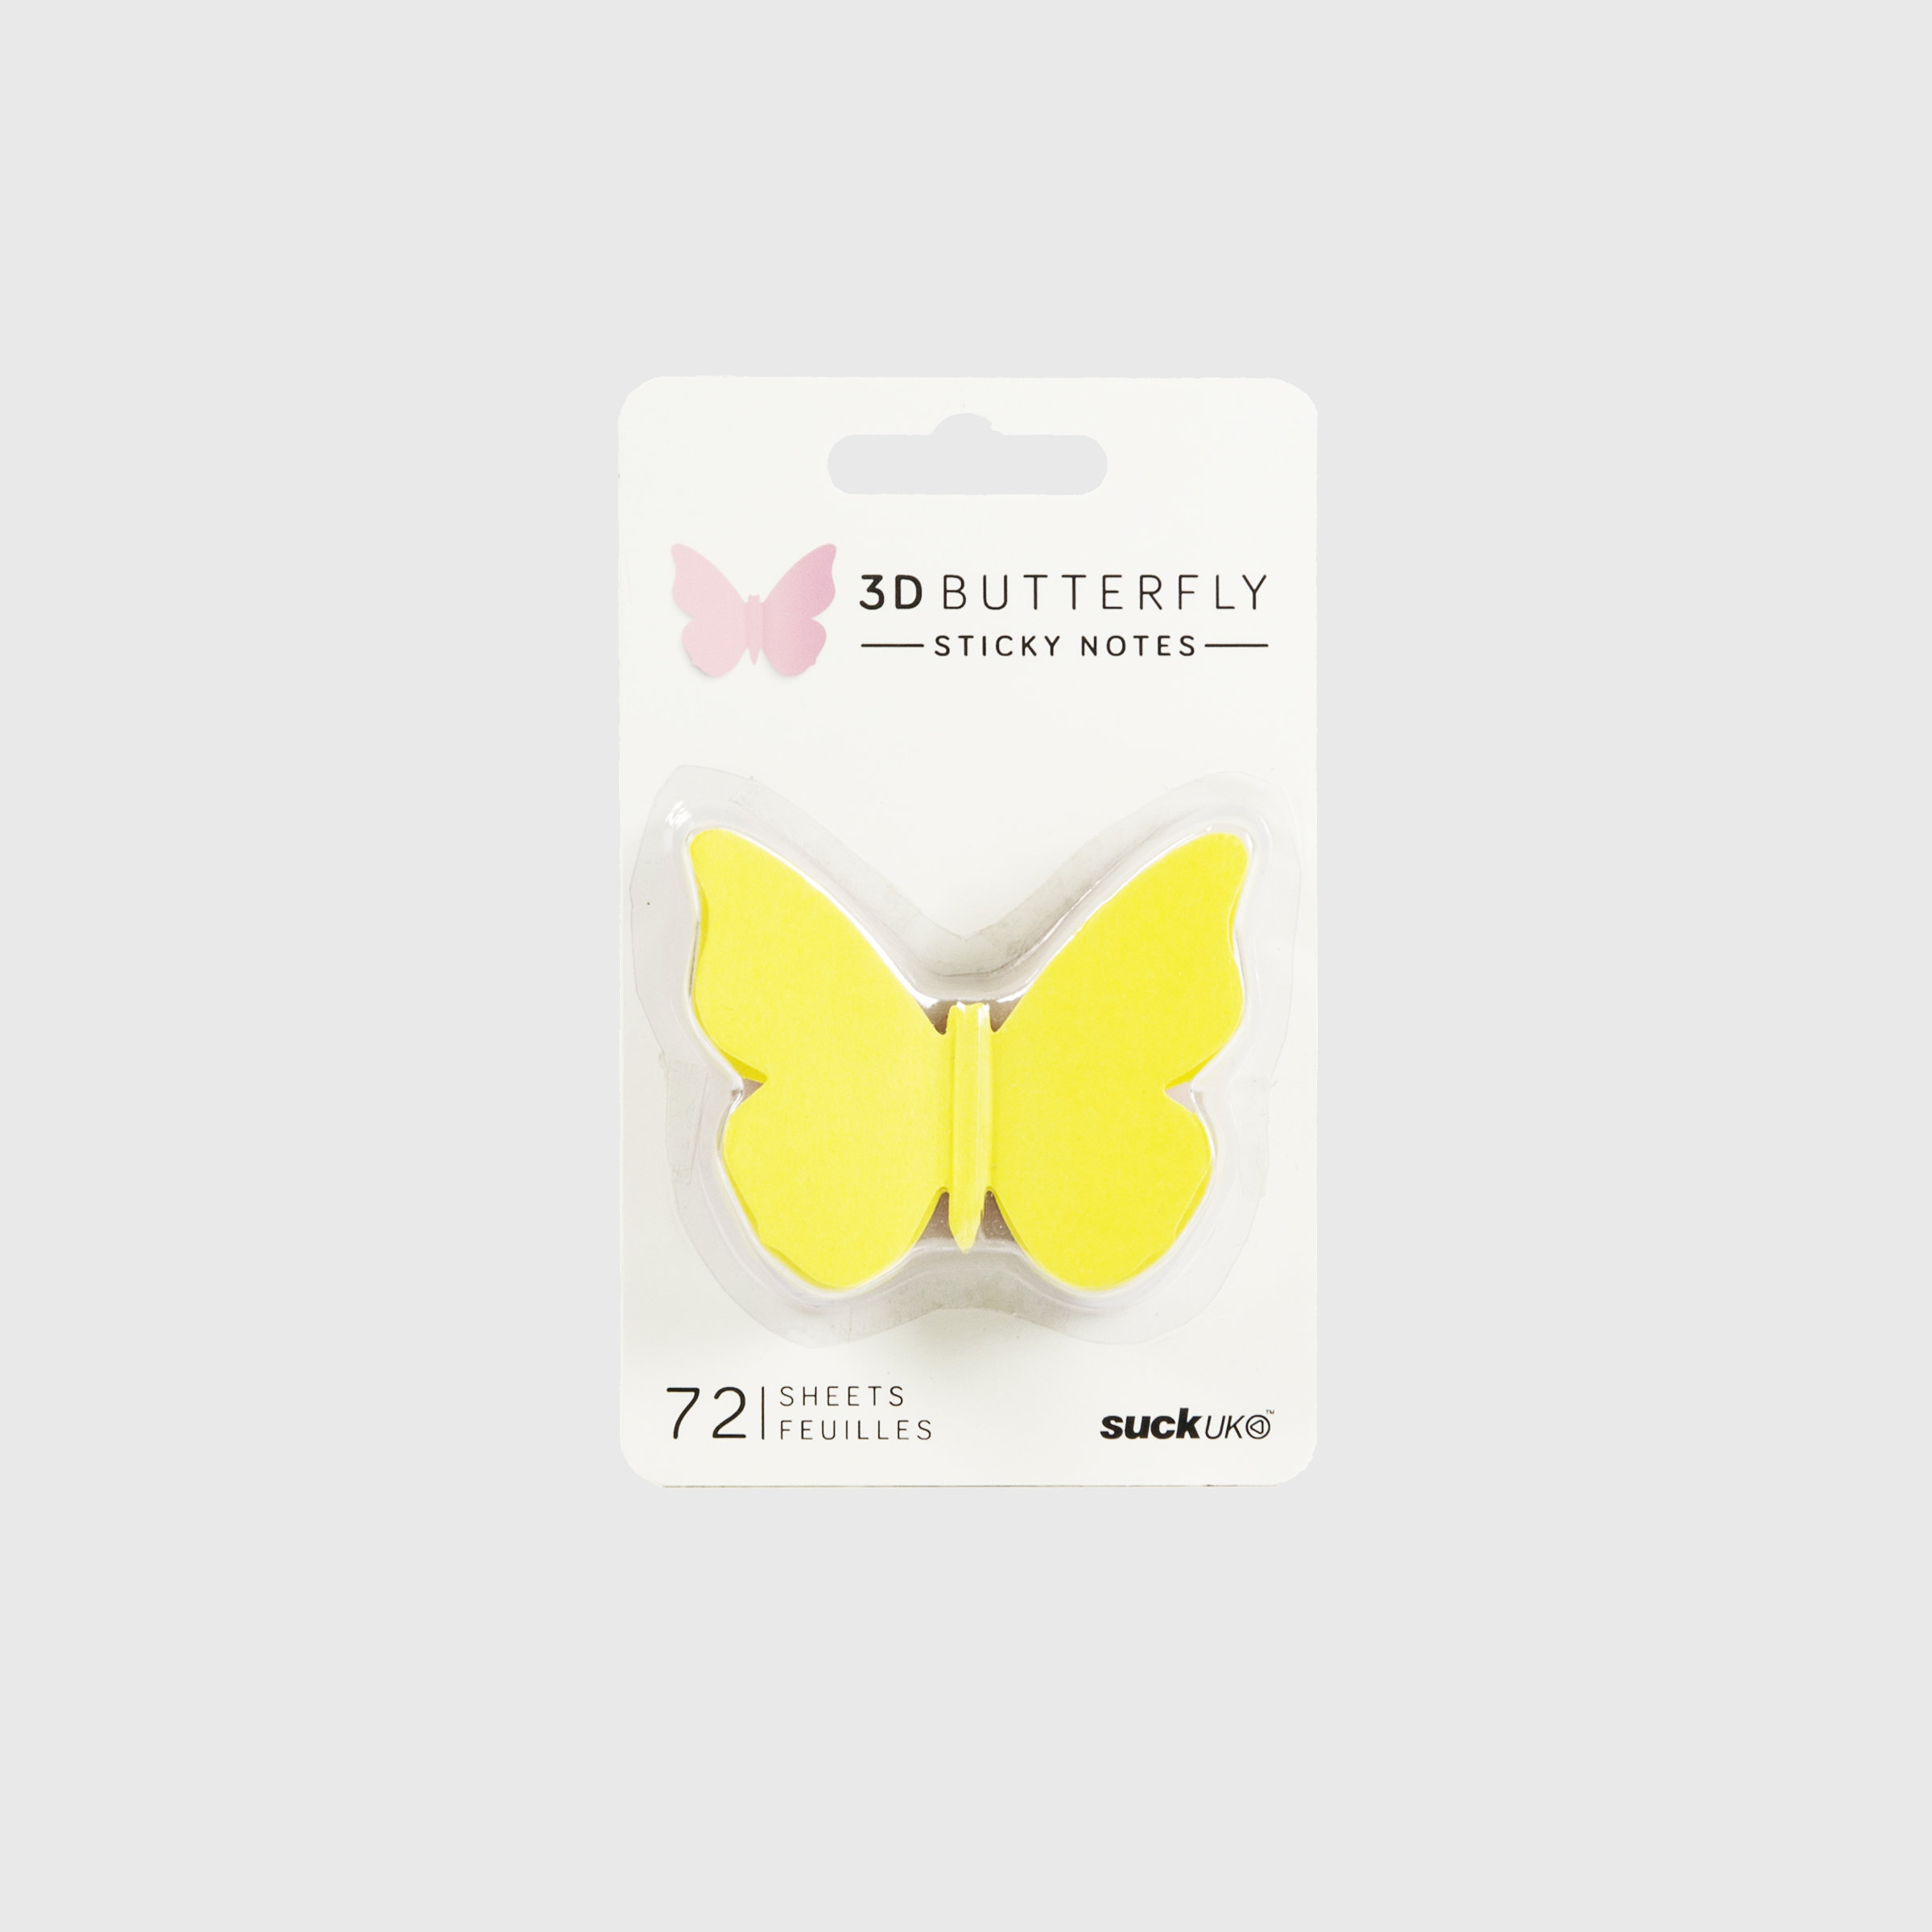 3D butterfly sticky notes in packaging